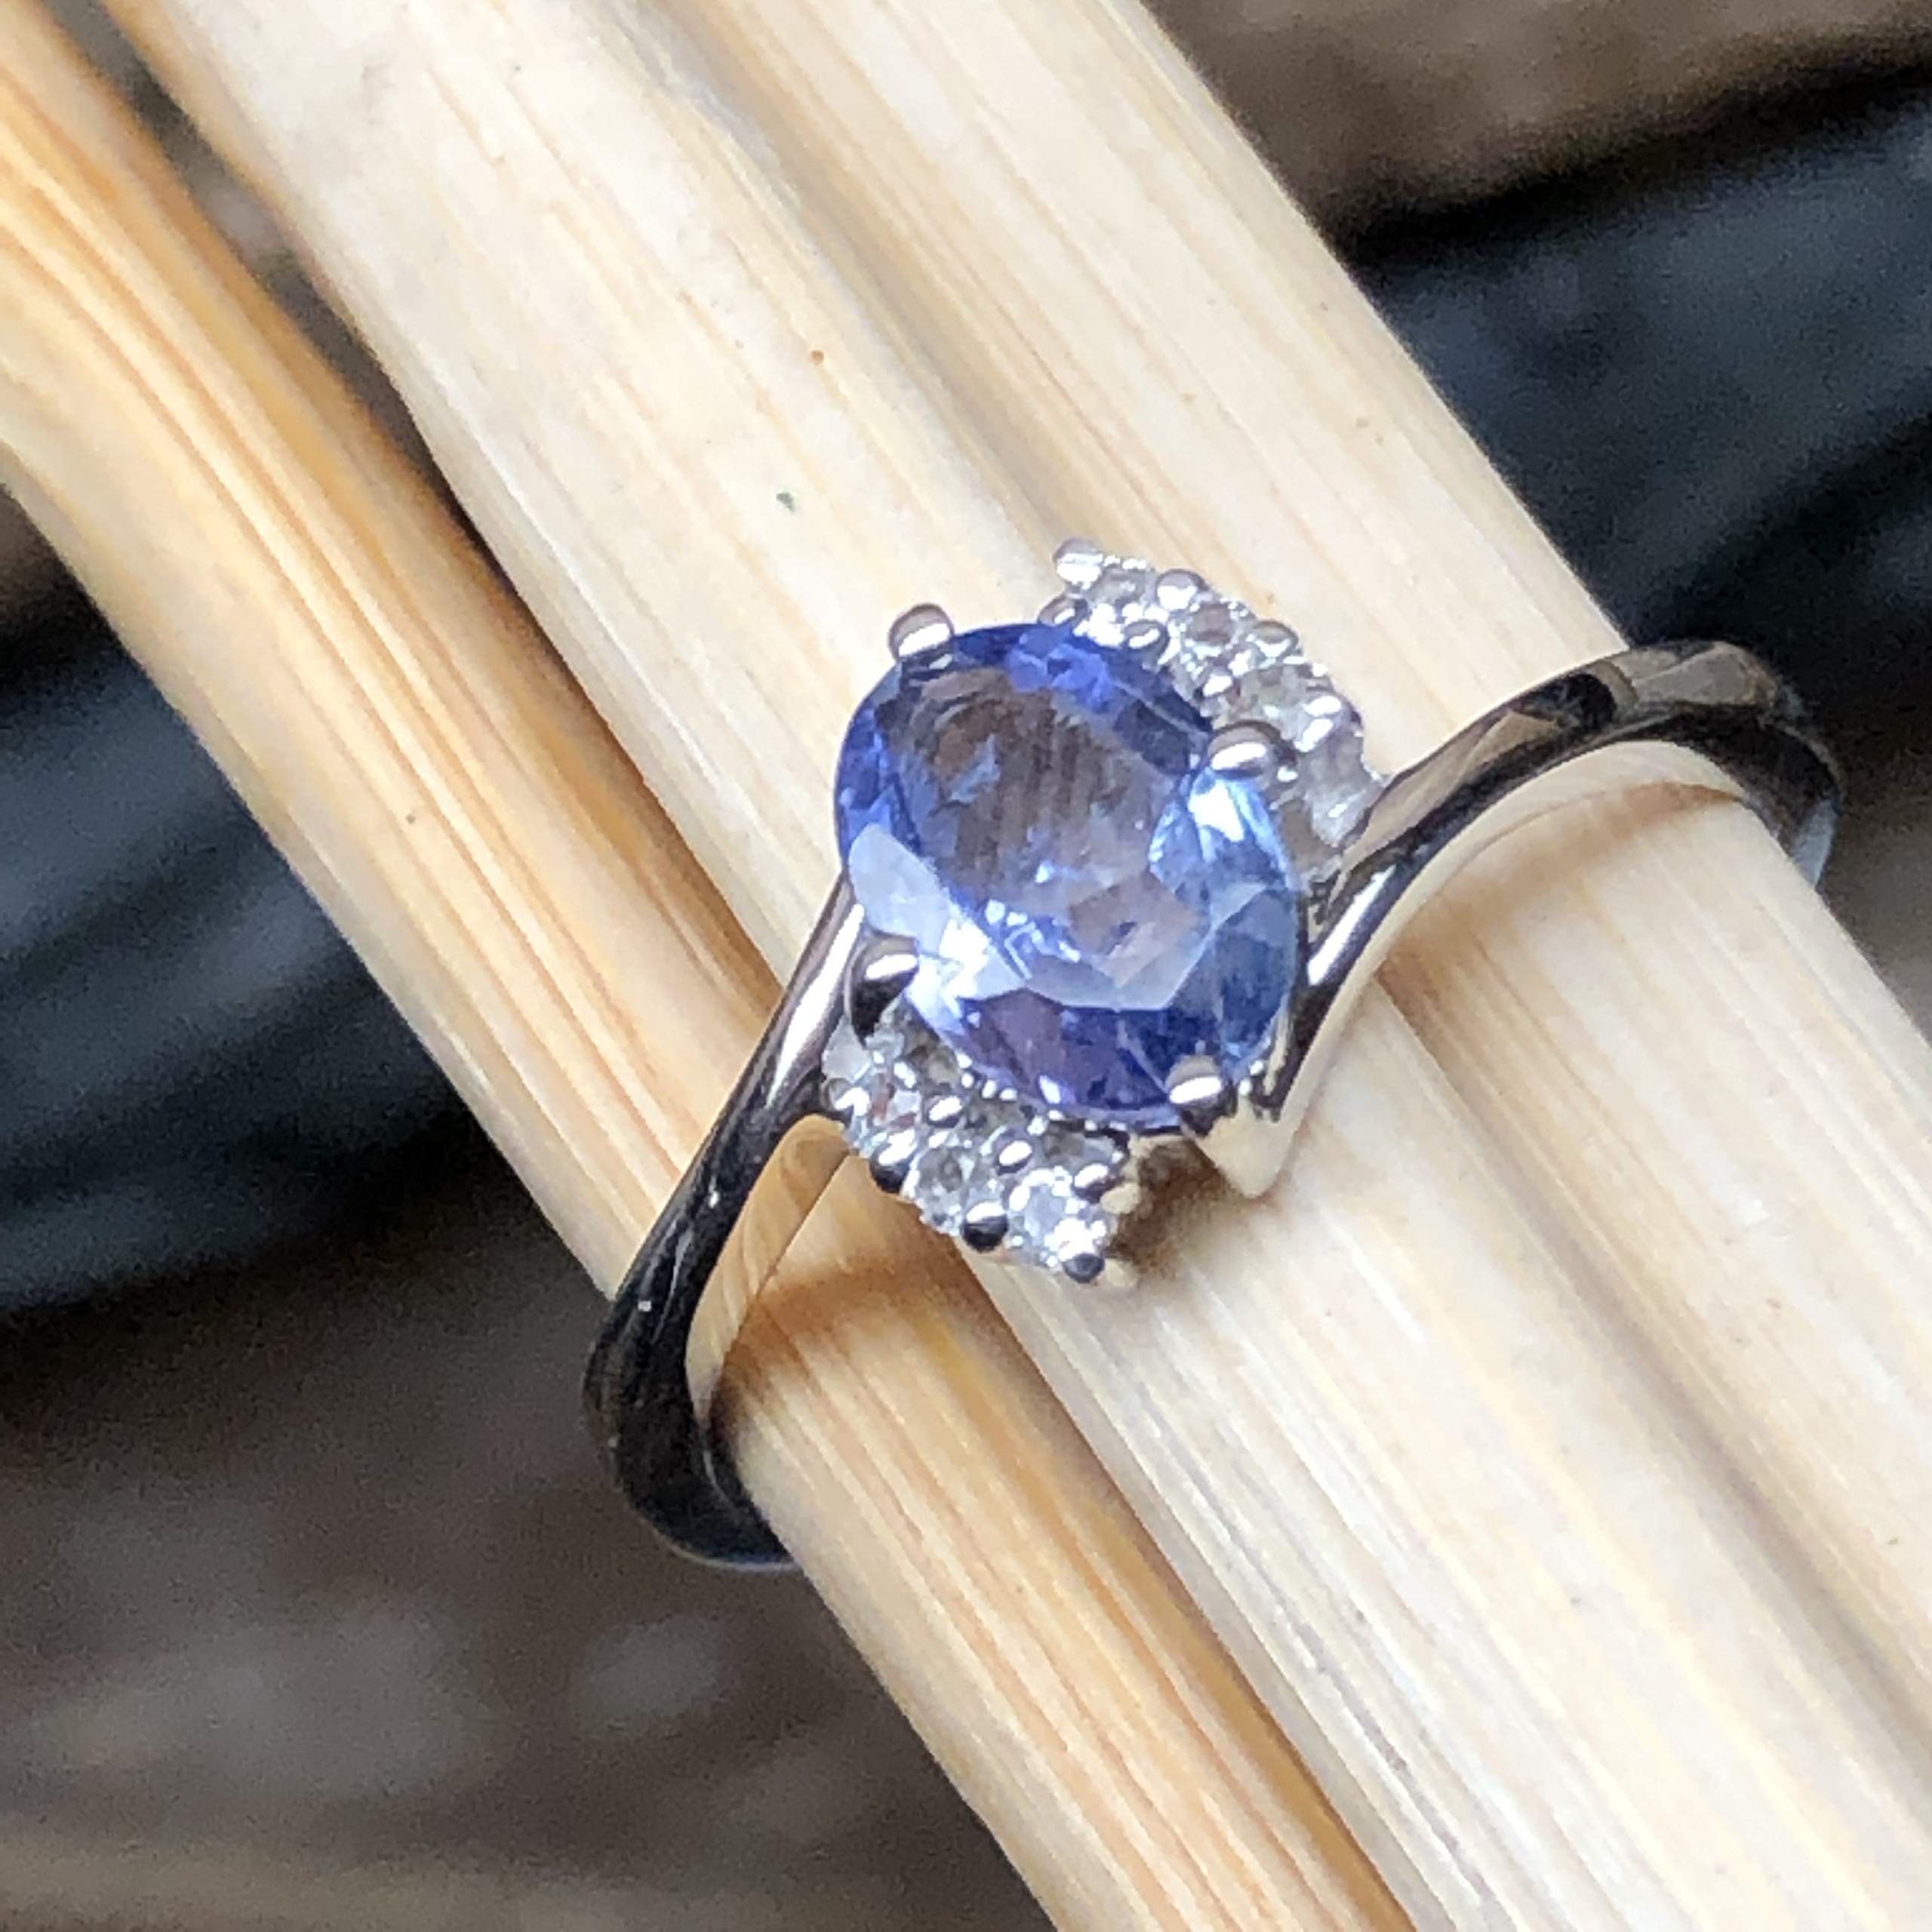 Genuine Blue Tanzanite, White Topaz 925 Solid Sterling Silver Engagement Ring Size 6, 7, 8, 9 - Natural Rocks by Kala